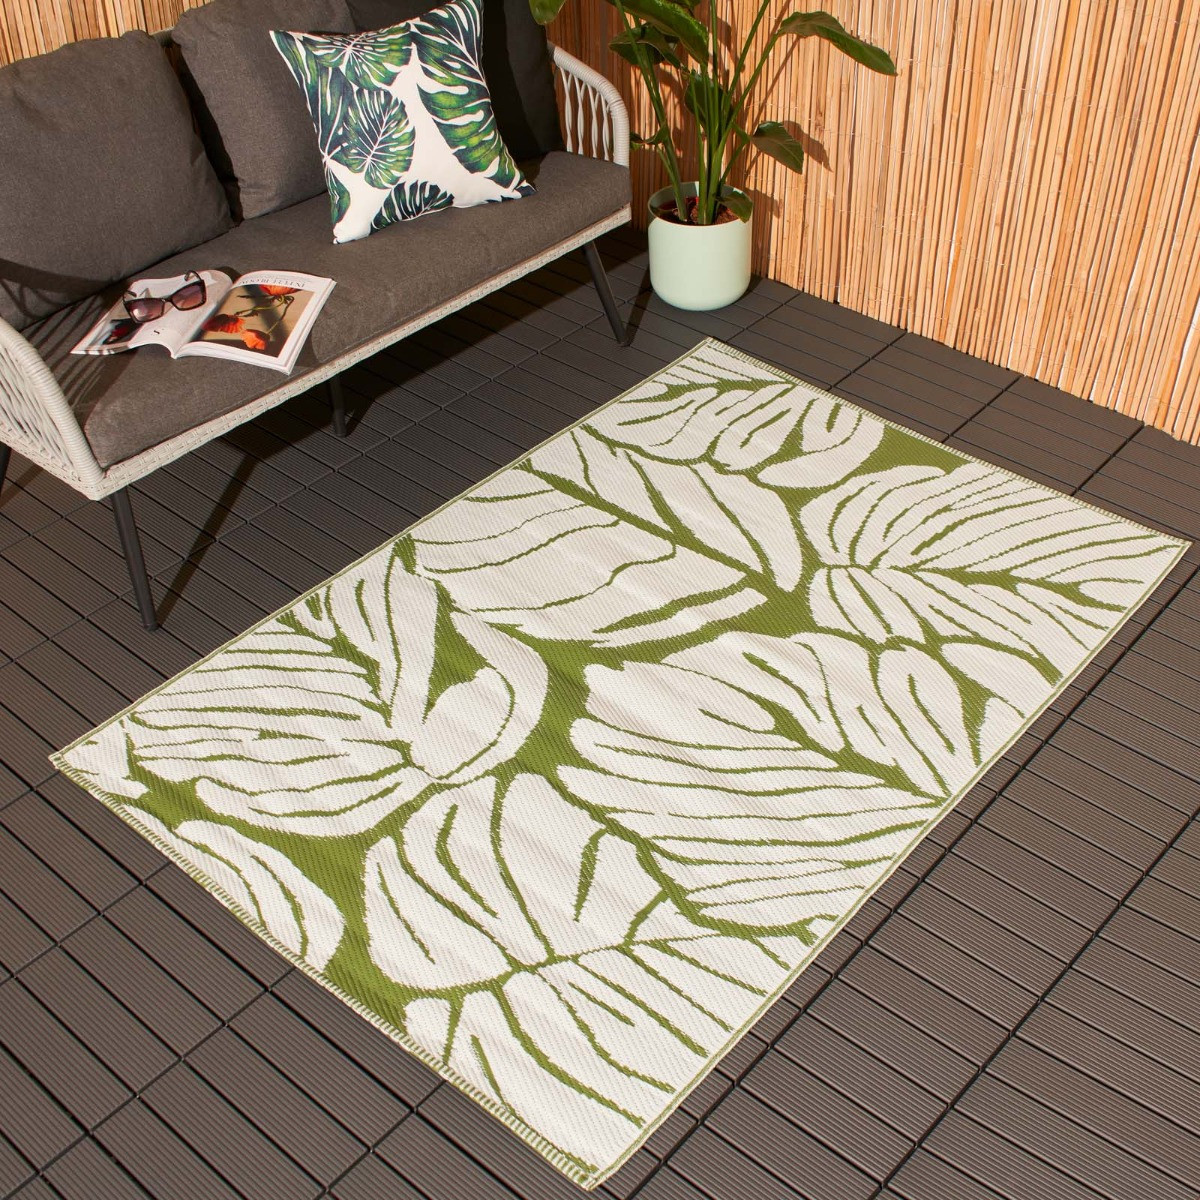 OHS Tropical Print Reversible Outdoor Rug - Green/White>